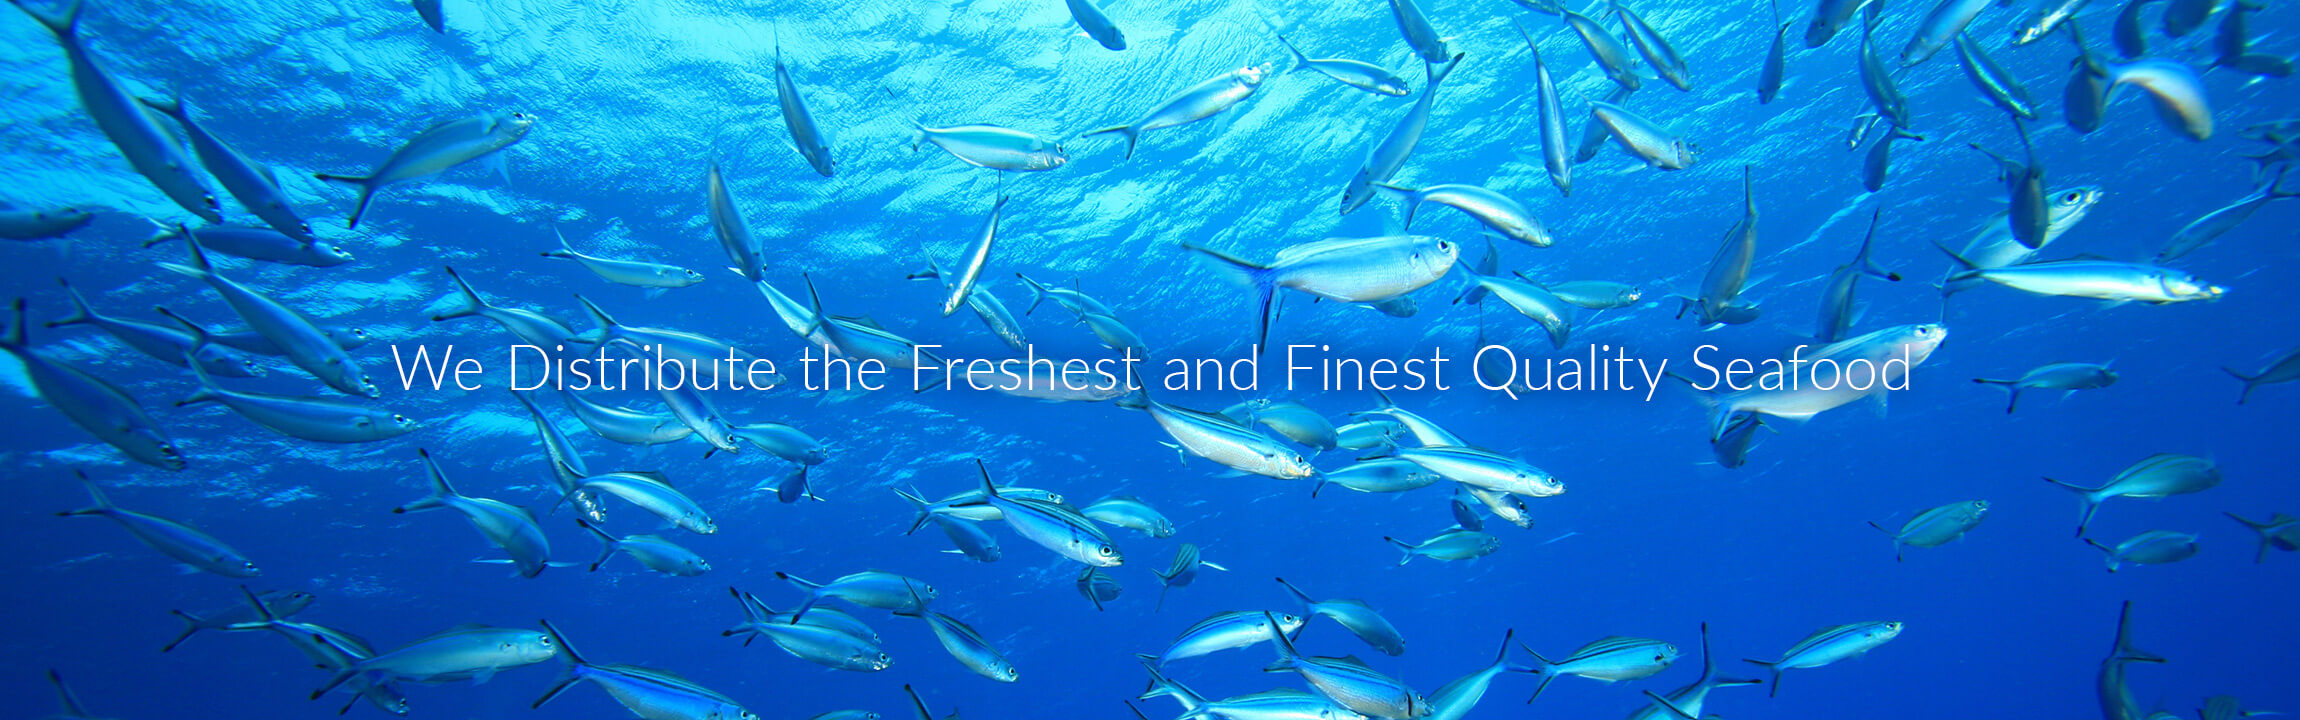 We Distribute the Freshest and Finest Quality Seafood